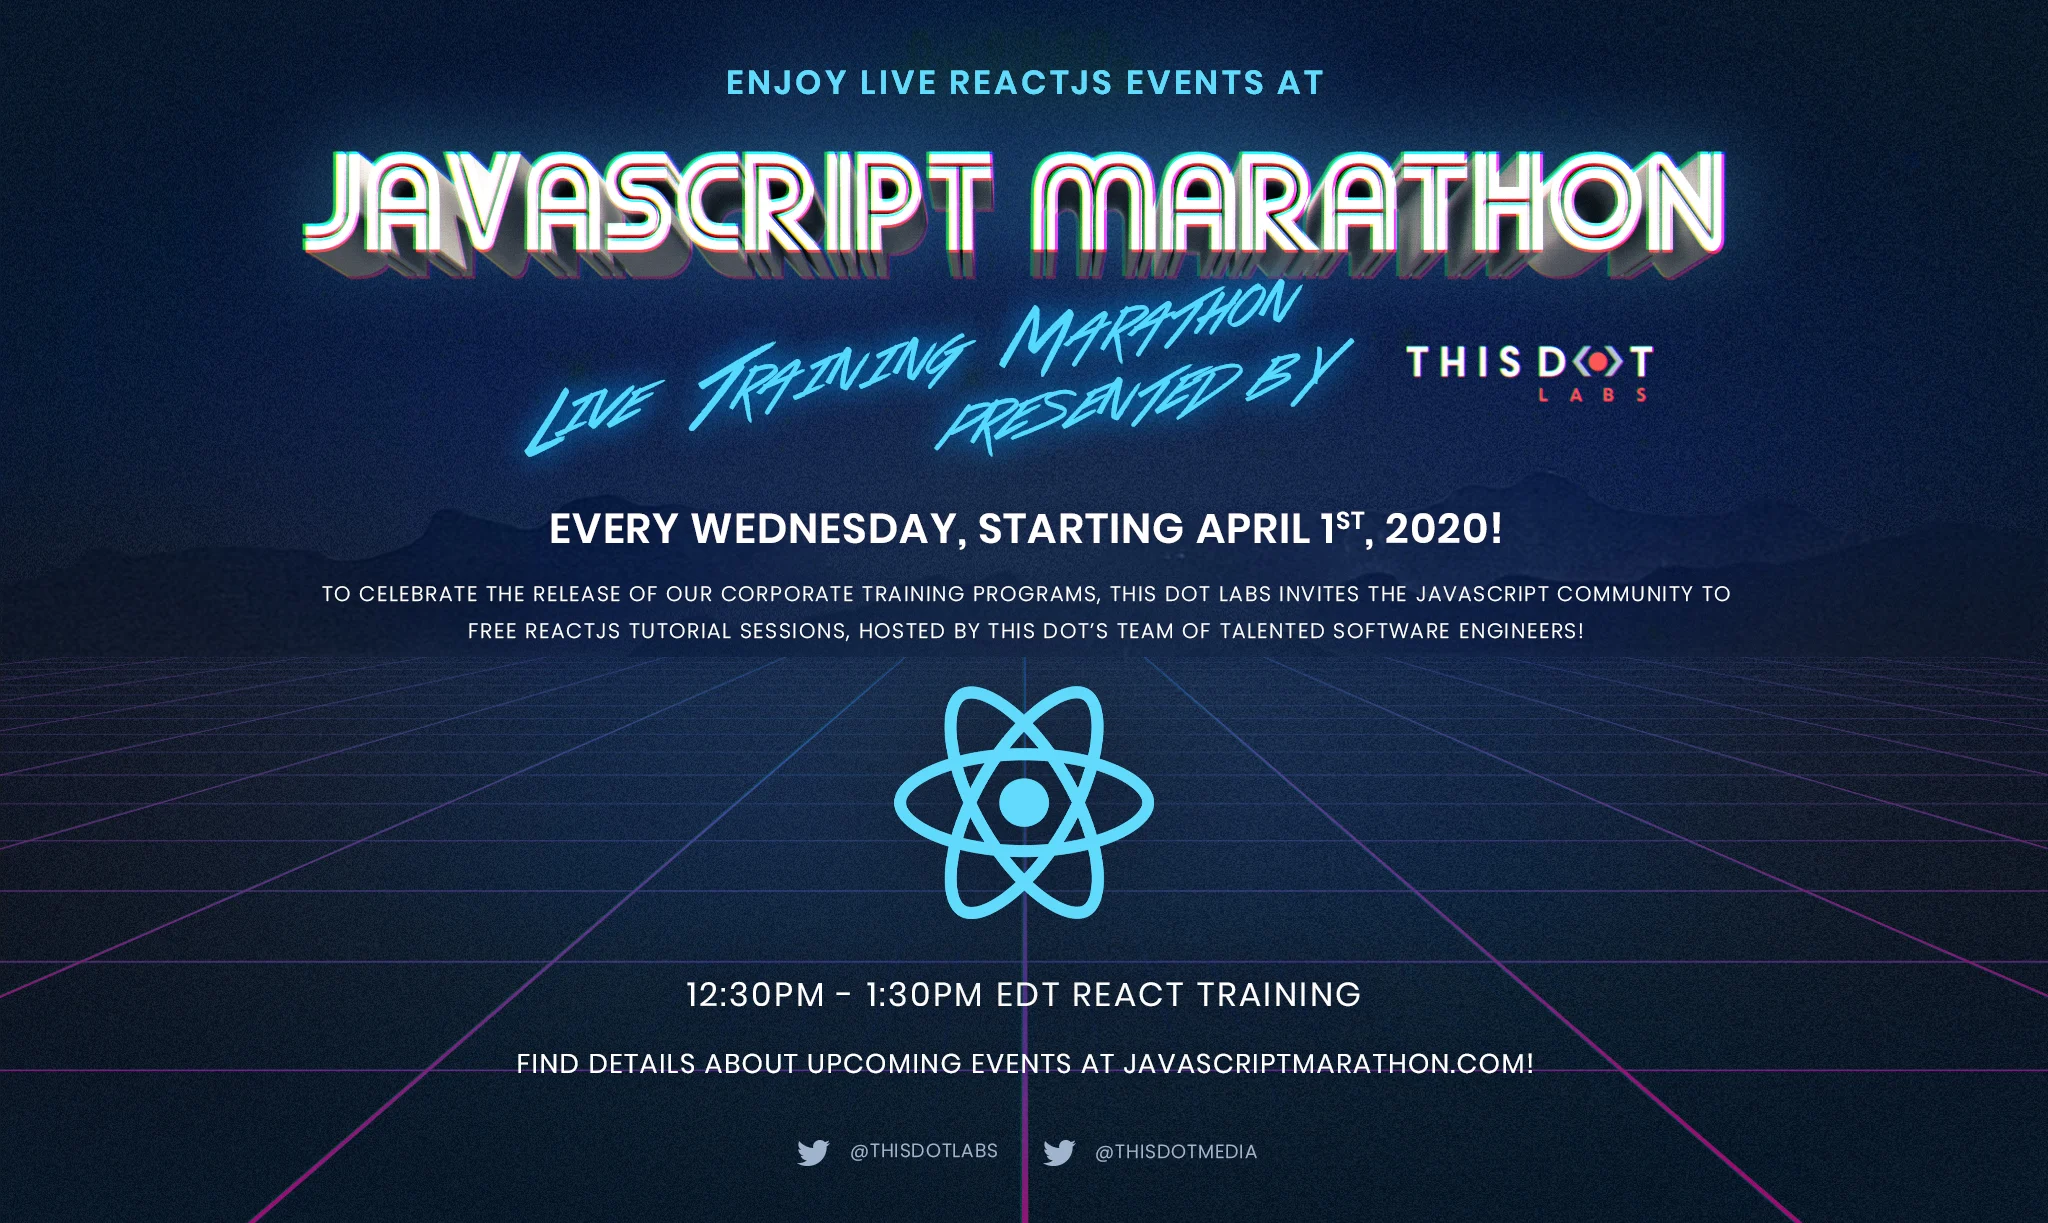 Get Hooked! Free React Training during the JavaScript Marathon by This Dot Labs this April!